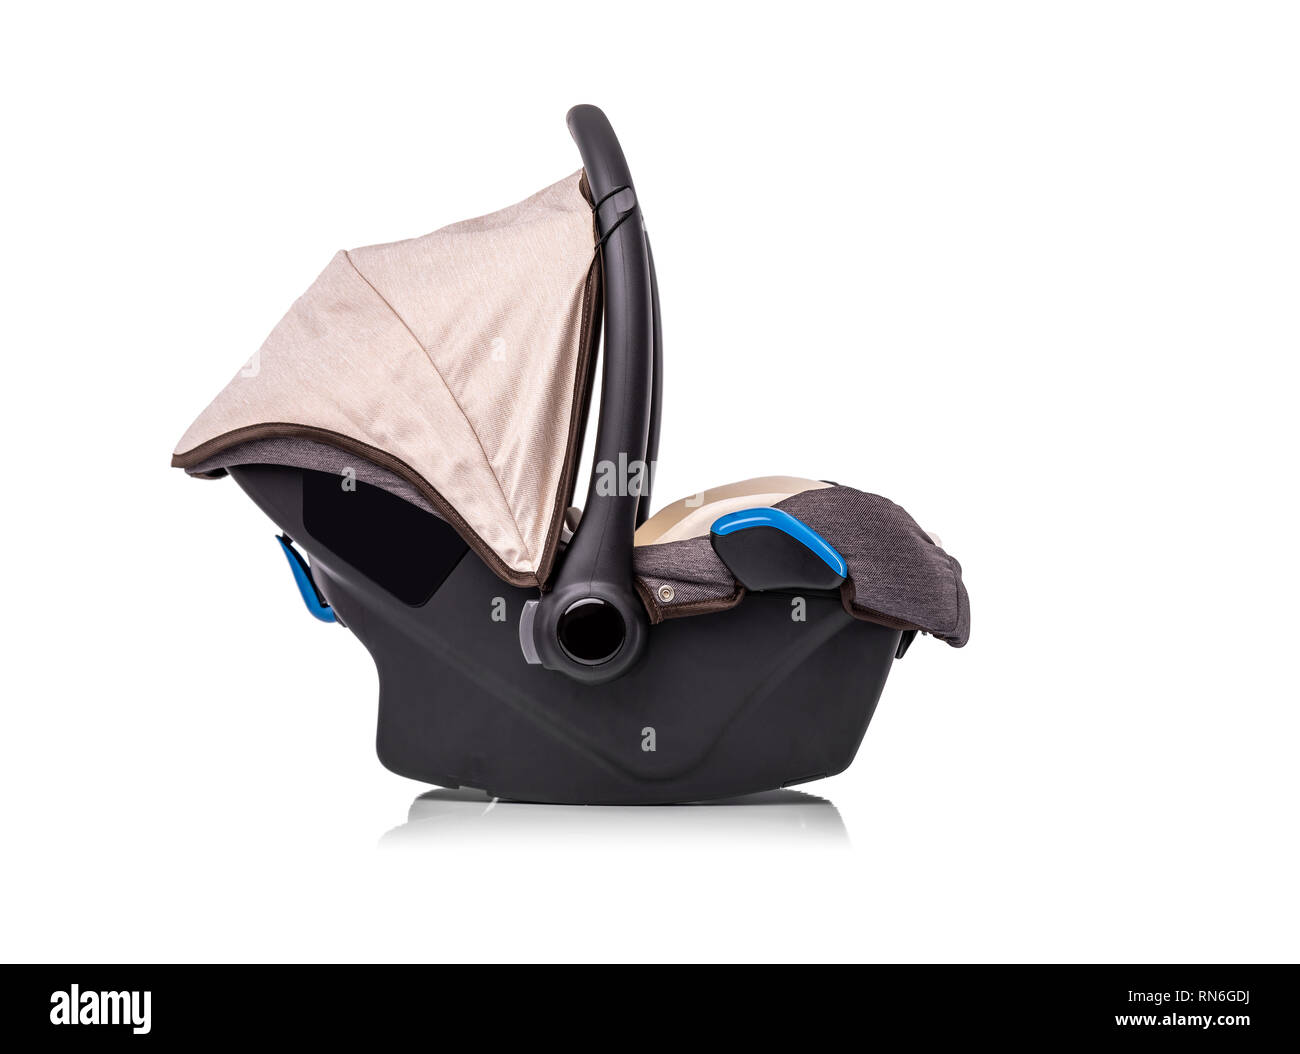 Baby car seat isolated on a white background Stock Photo